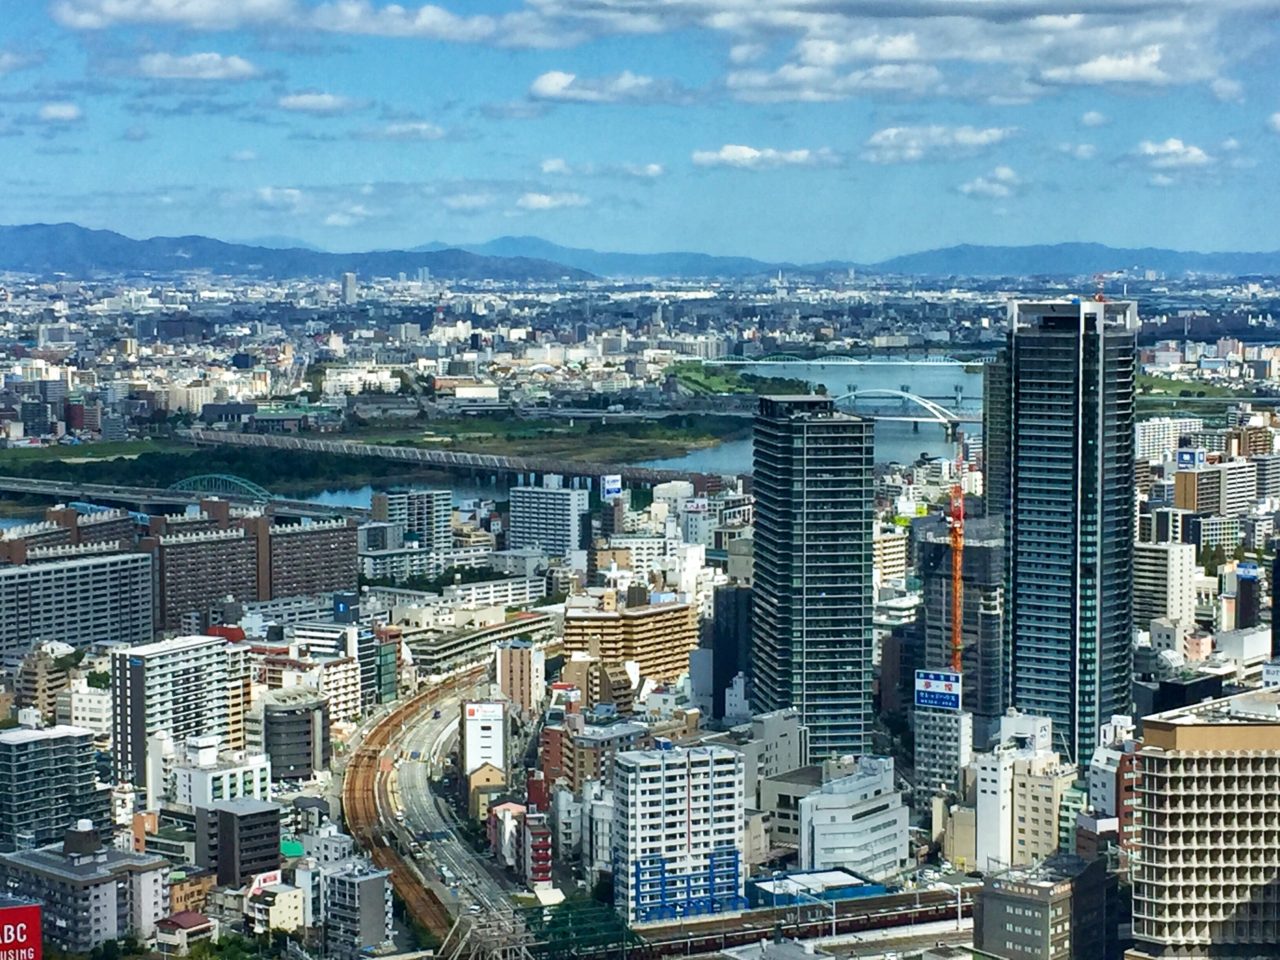 Japan Culinary Experiences ~ View of Osaka, the "nation's kitchen", from the rooftop obeservation deck of the Sky Umeda Building